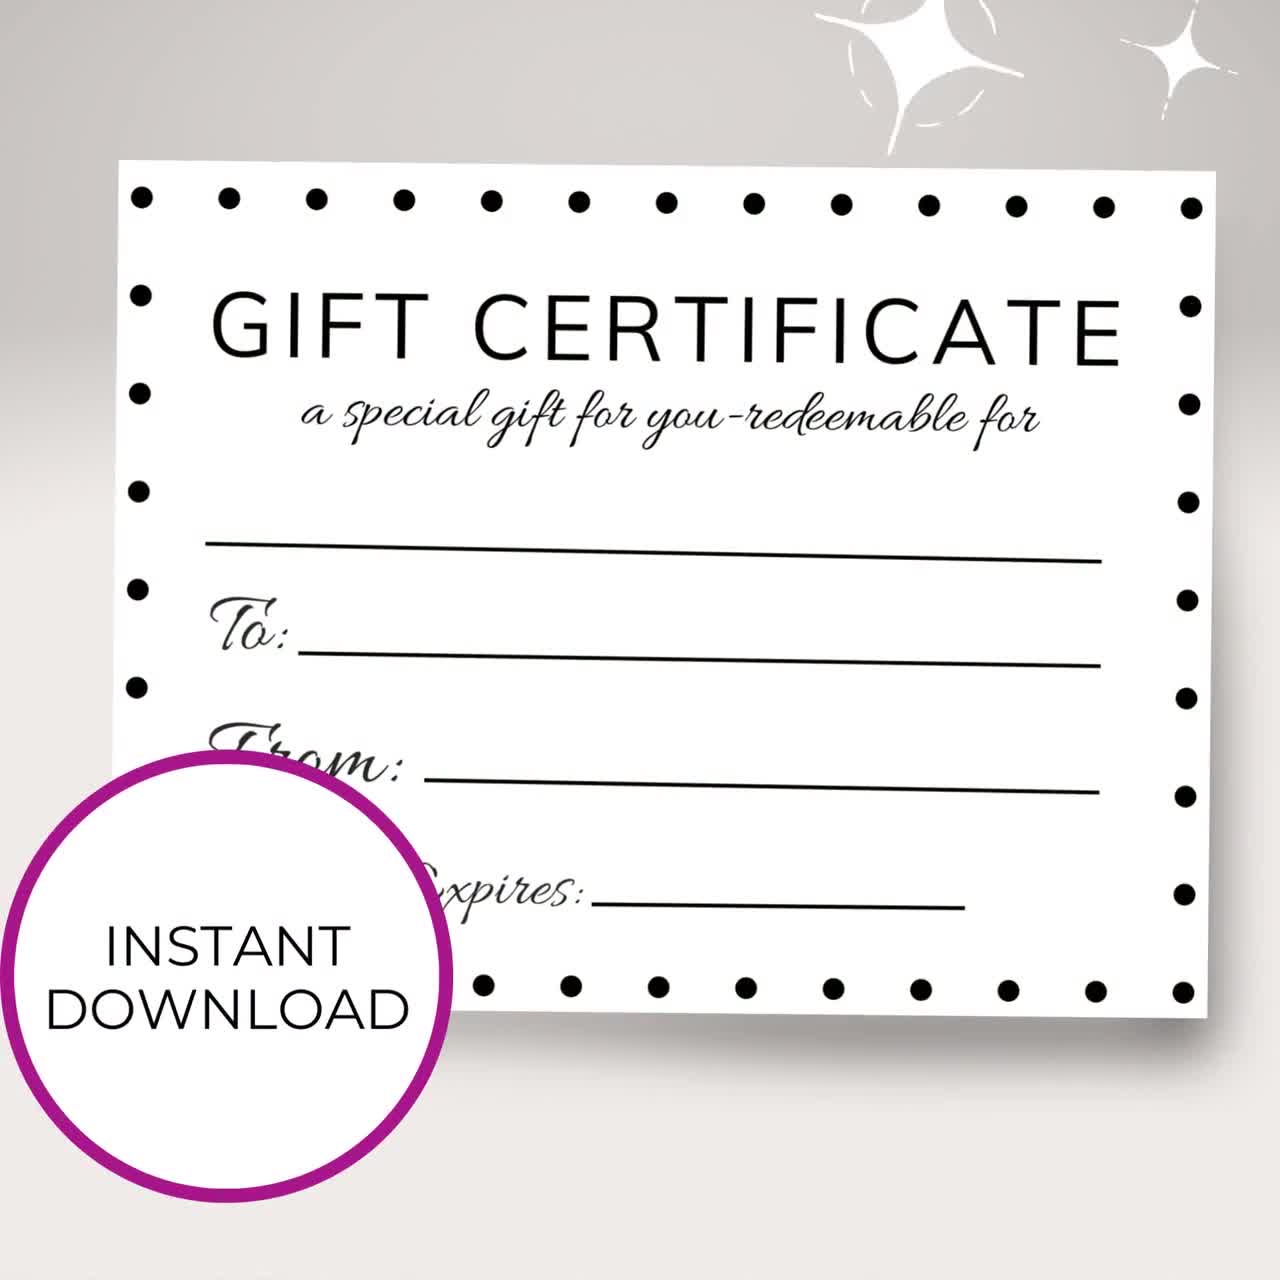 Gift Certificate Printable, Gift Voucher, Certificate Template, Gift Card  Printable, Blank Certificate Birthday DIY Coupon Card for Her 